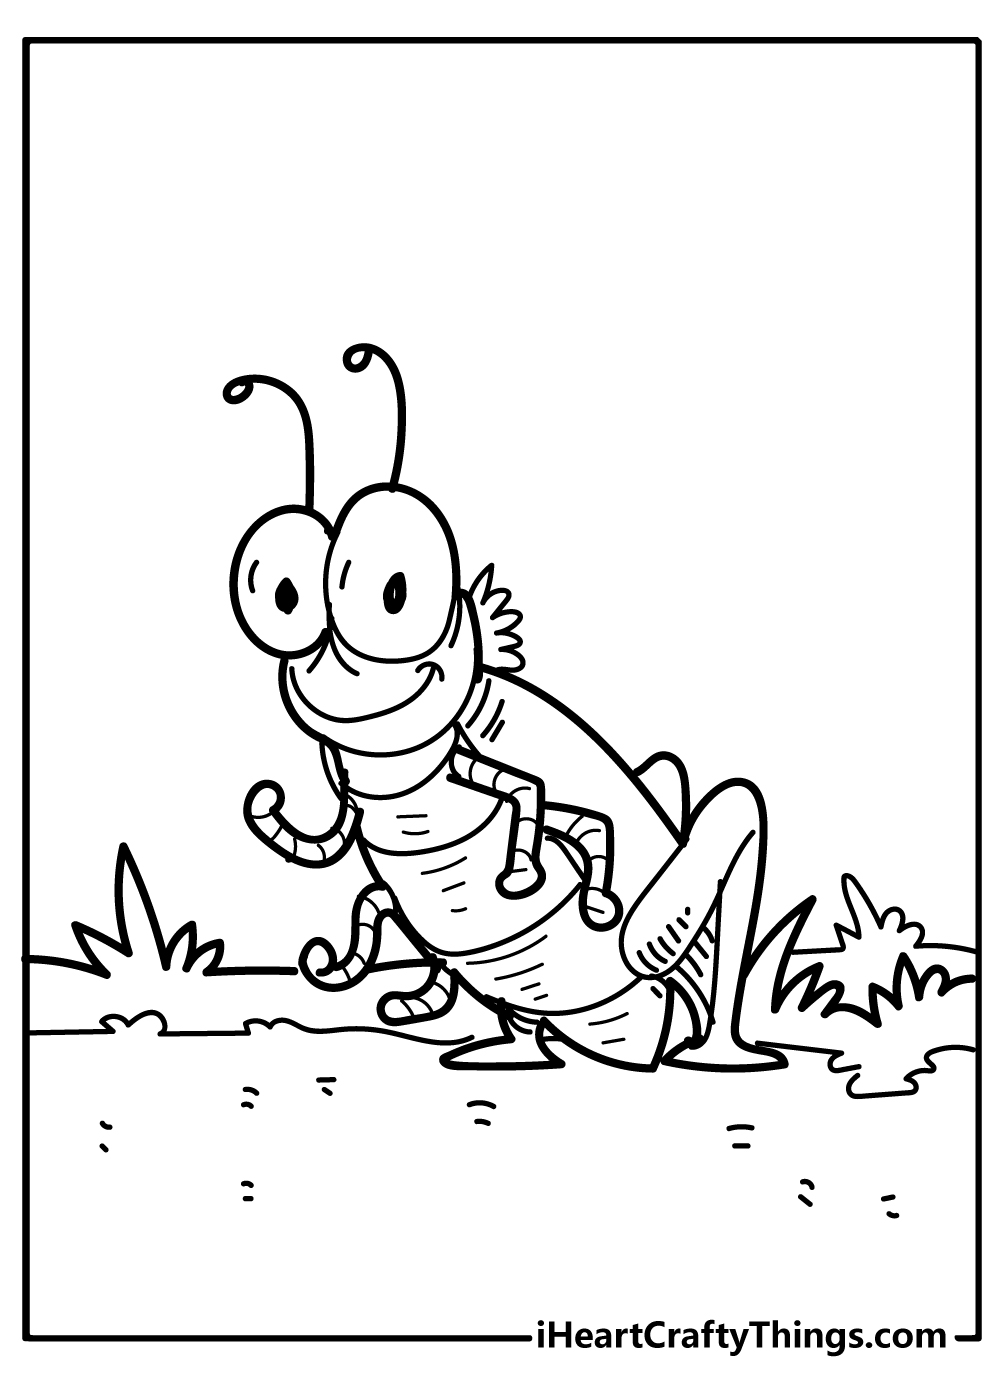 Bug Coloring Pages for adults free printable